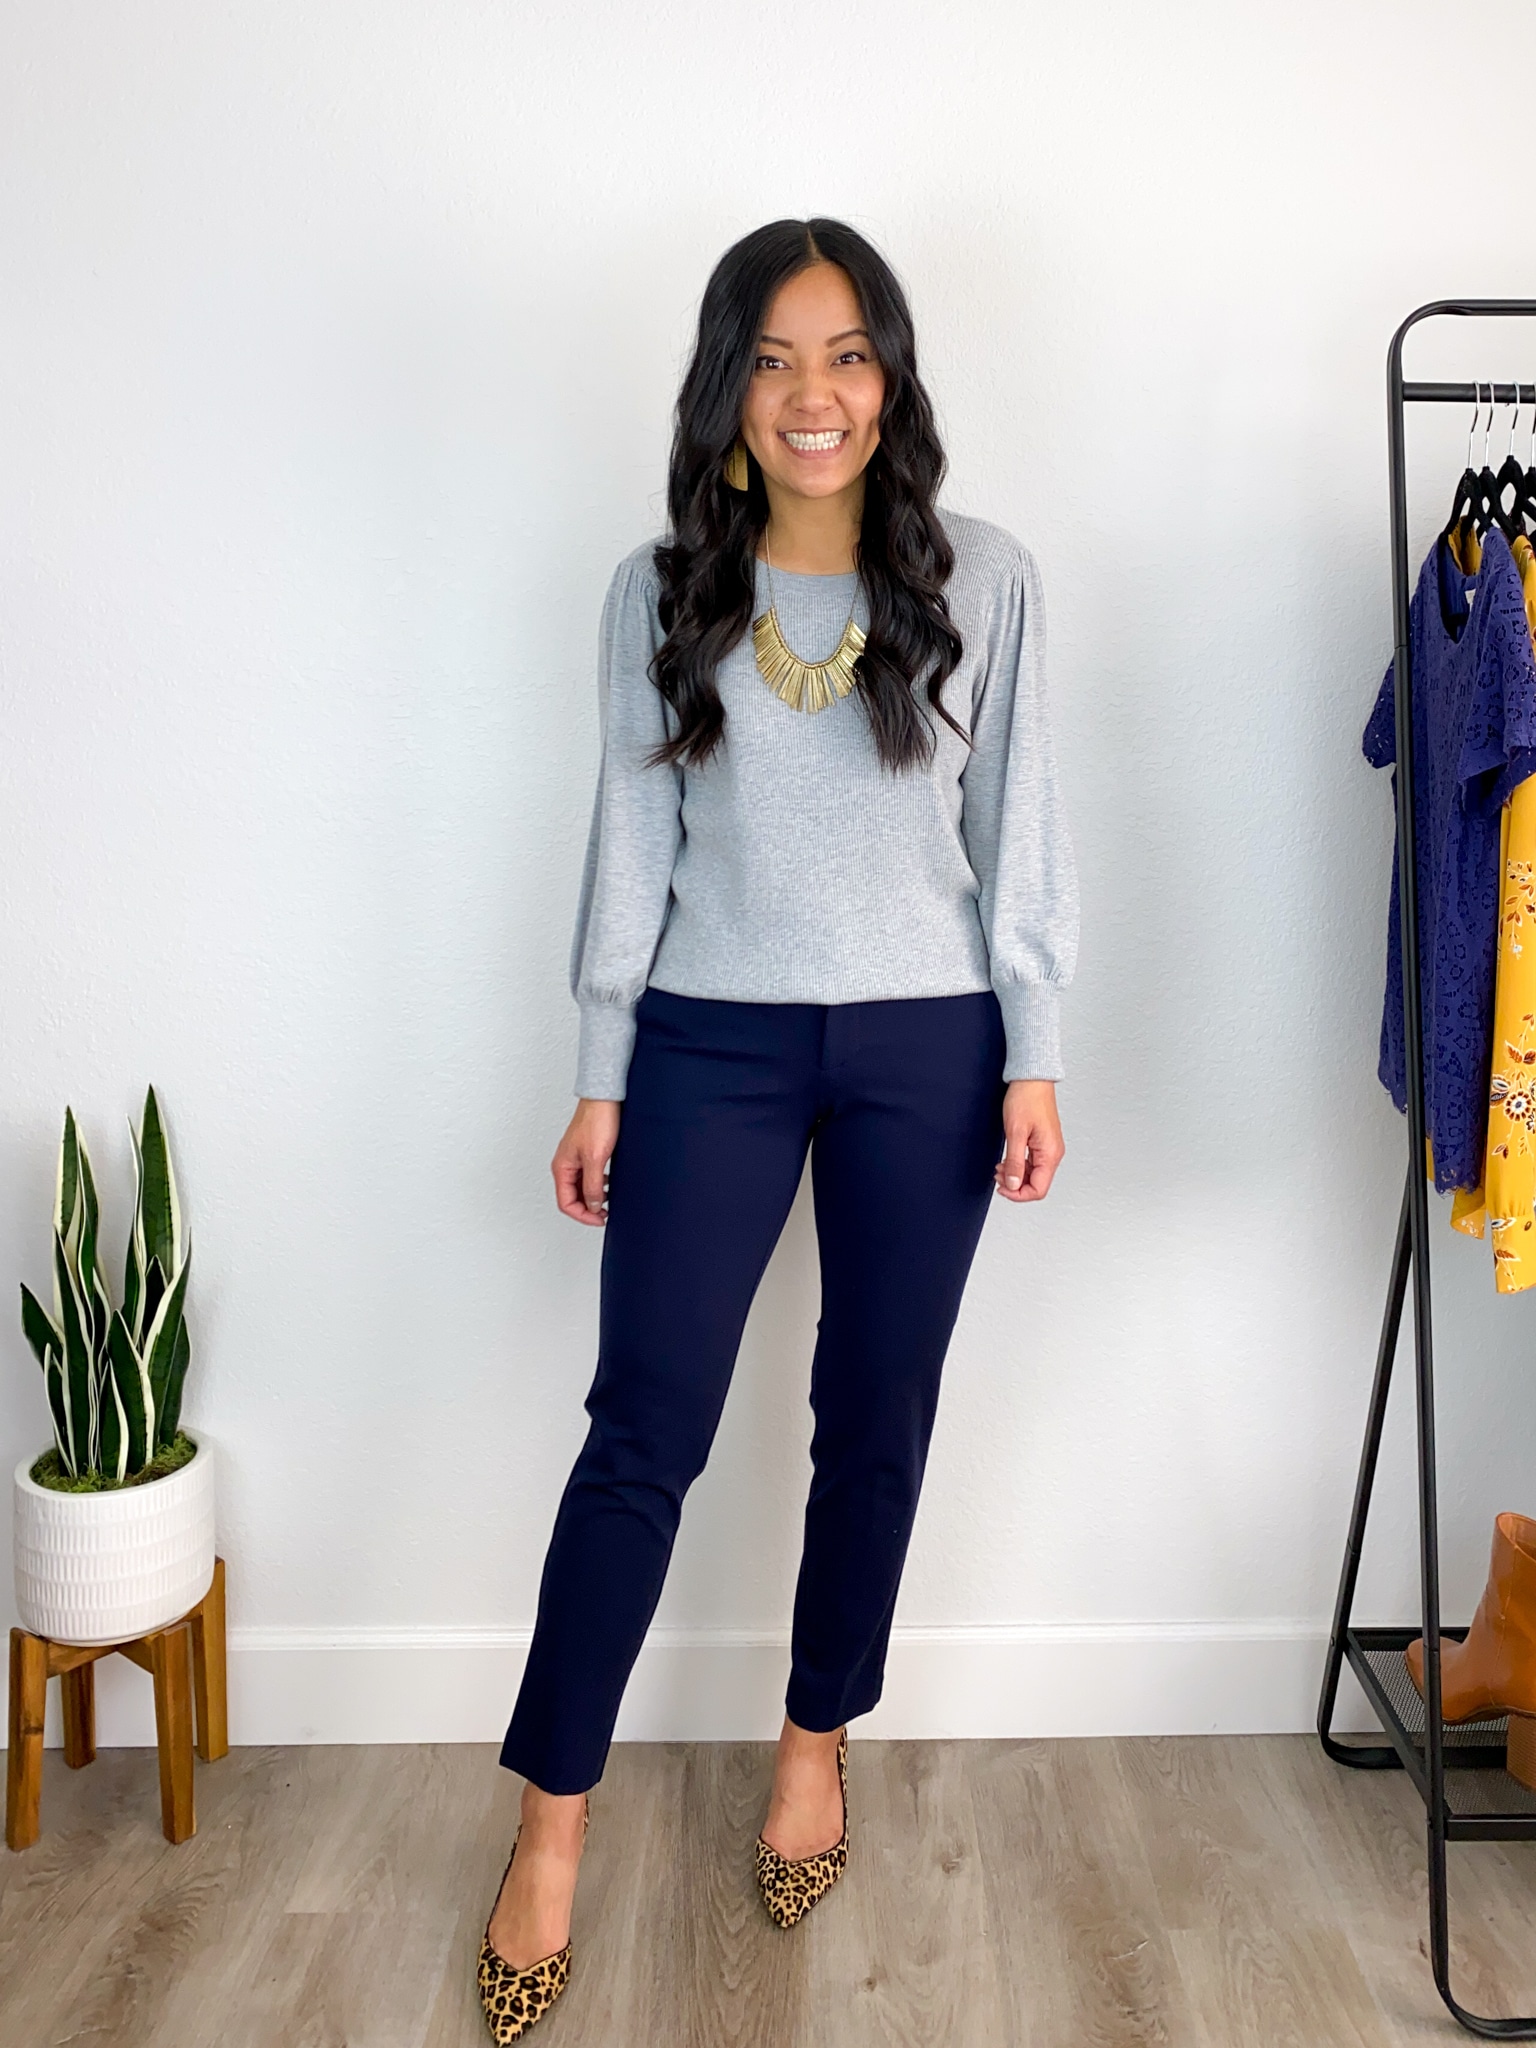 5 Ways to Style Denim for Spring  Smart casual women outfits, Work outfits  women, Business casual outfits for work